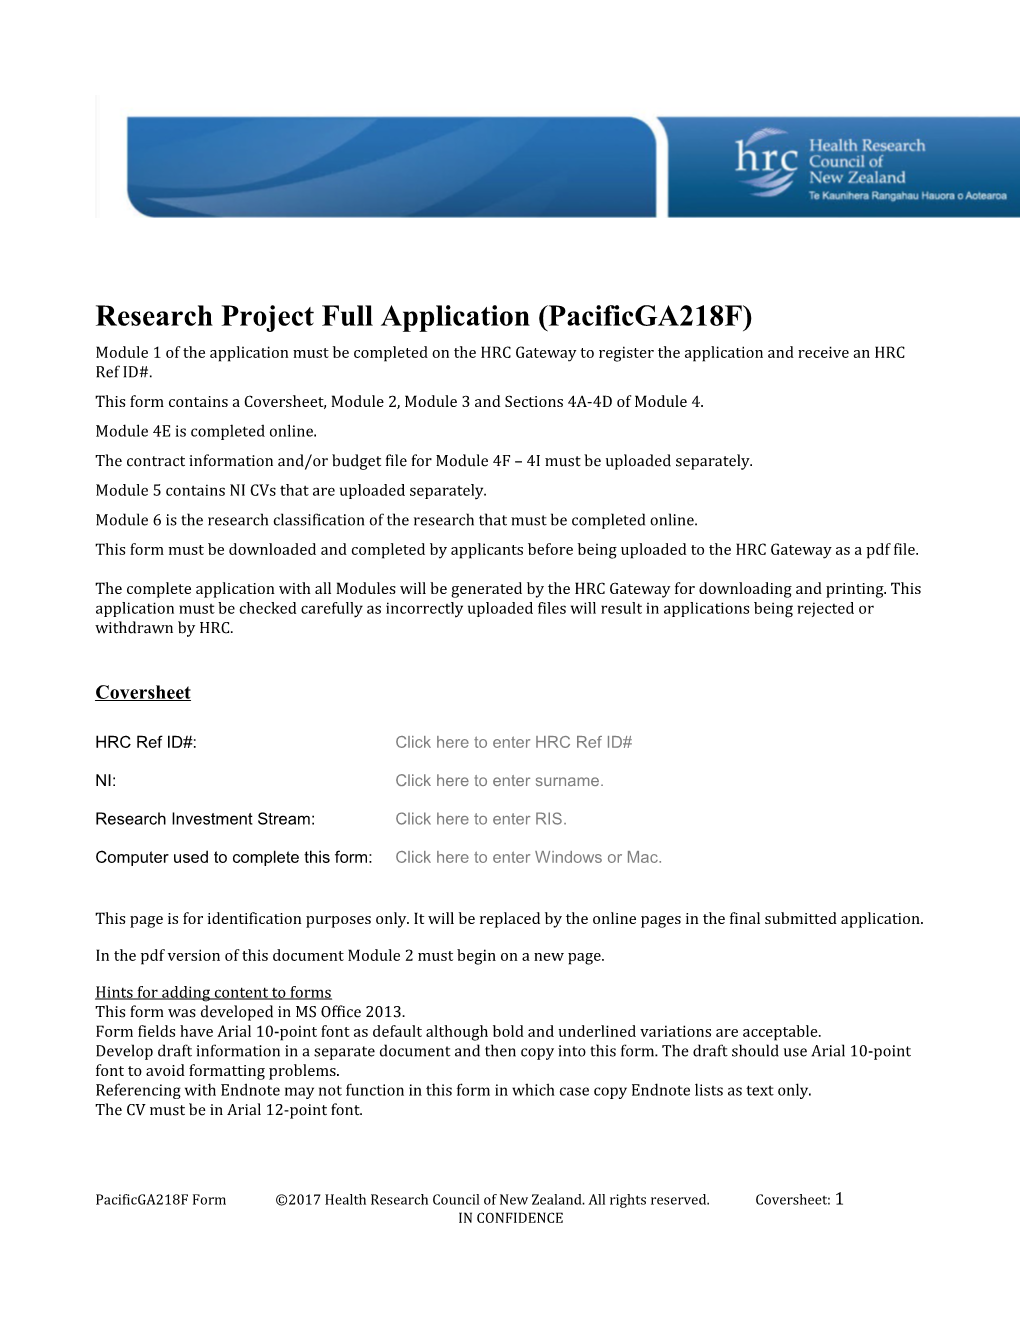 Research Project Full Application (Pacificga218f)